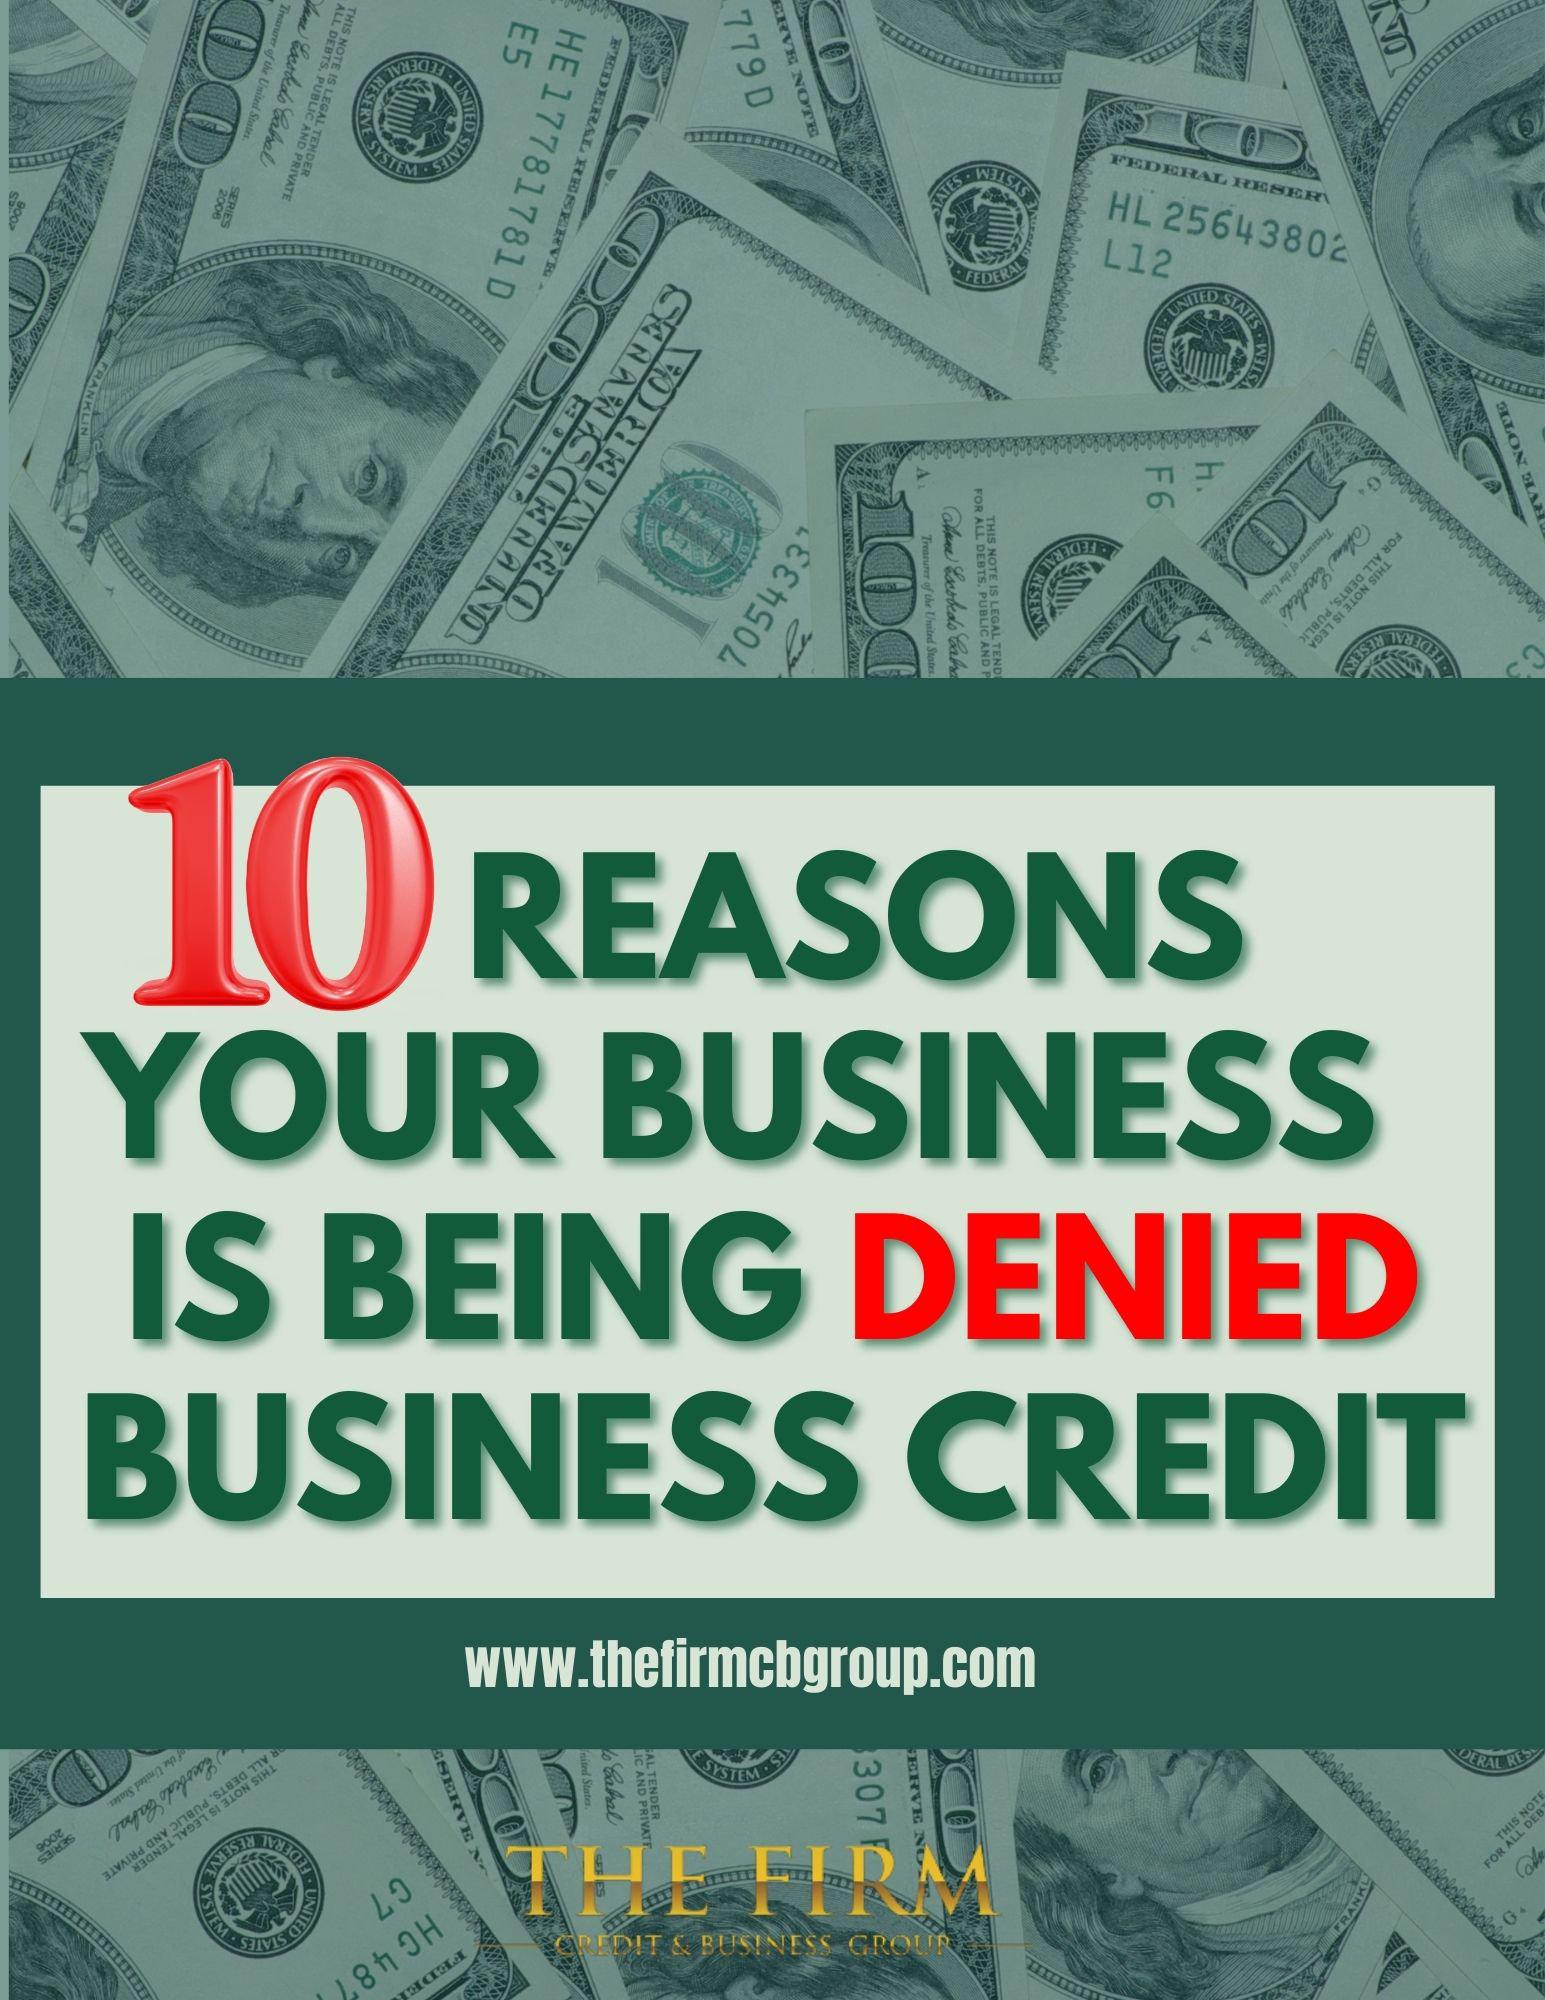 10 Reasons Business Is Being Denied Business Credit